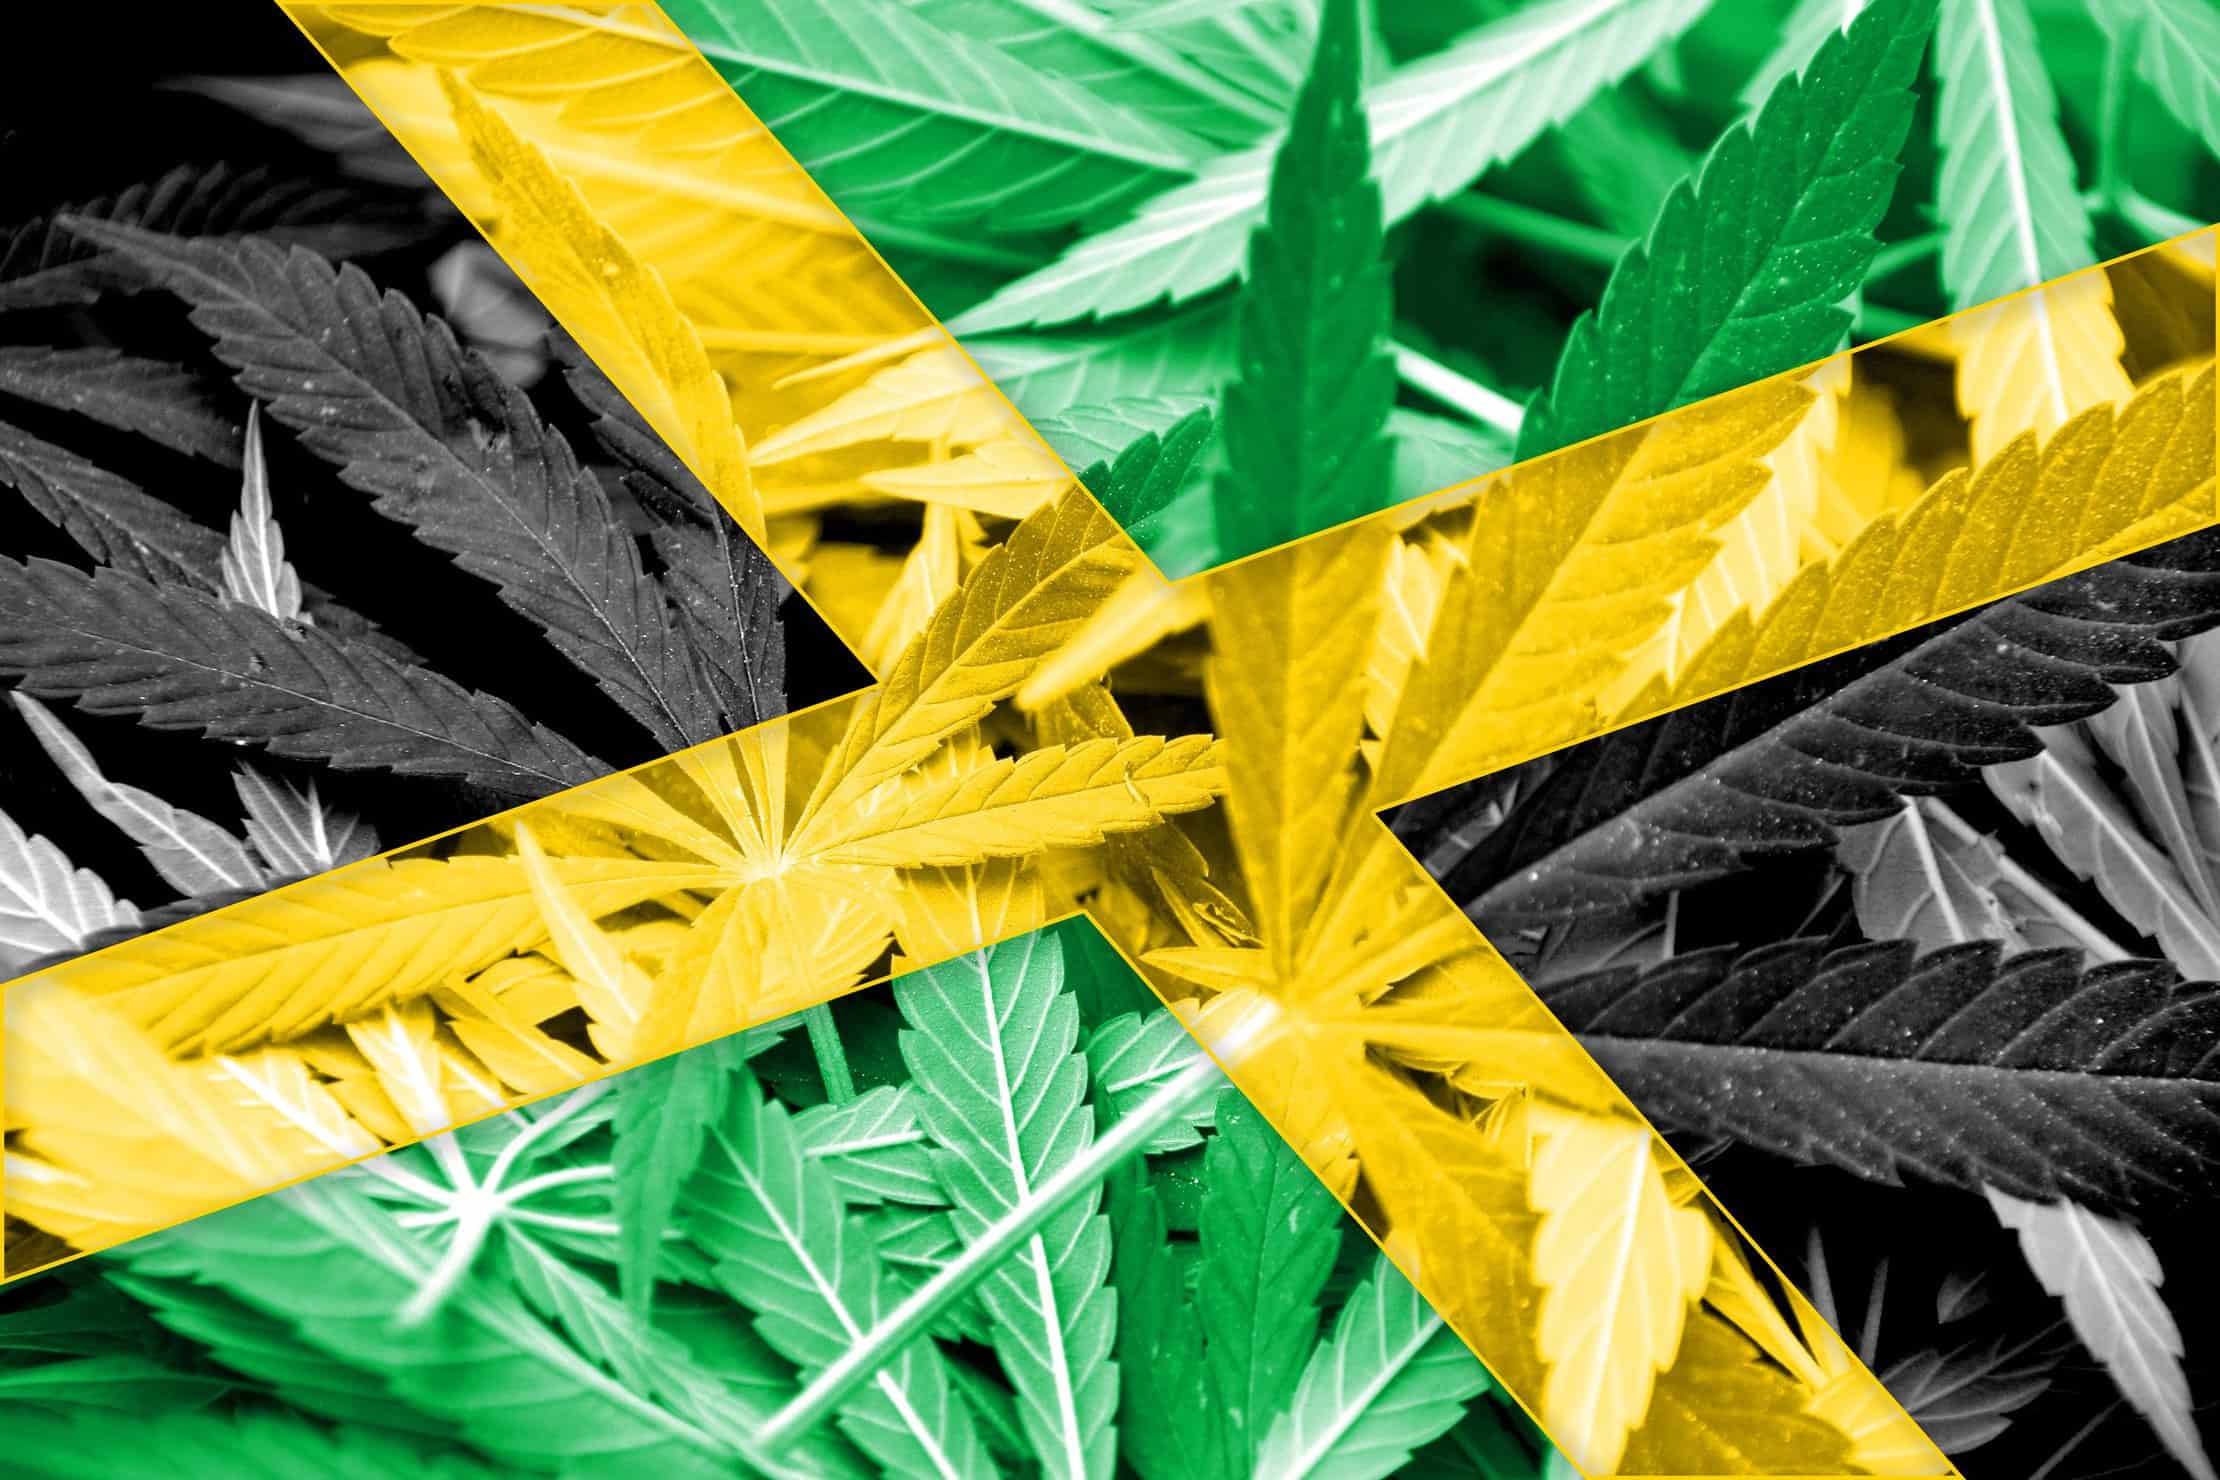 A Look at Marijuana Culture in Jamaica. Jamaican flag with weed leaves